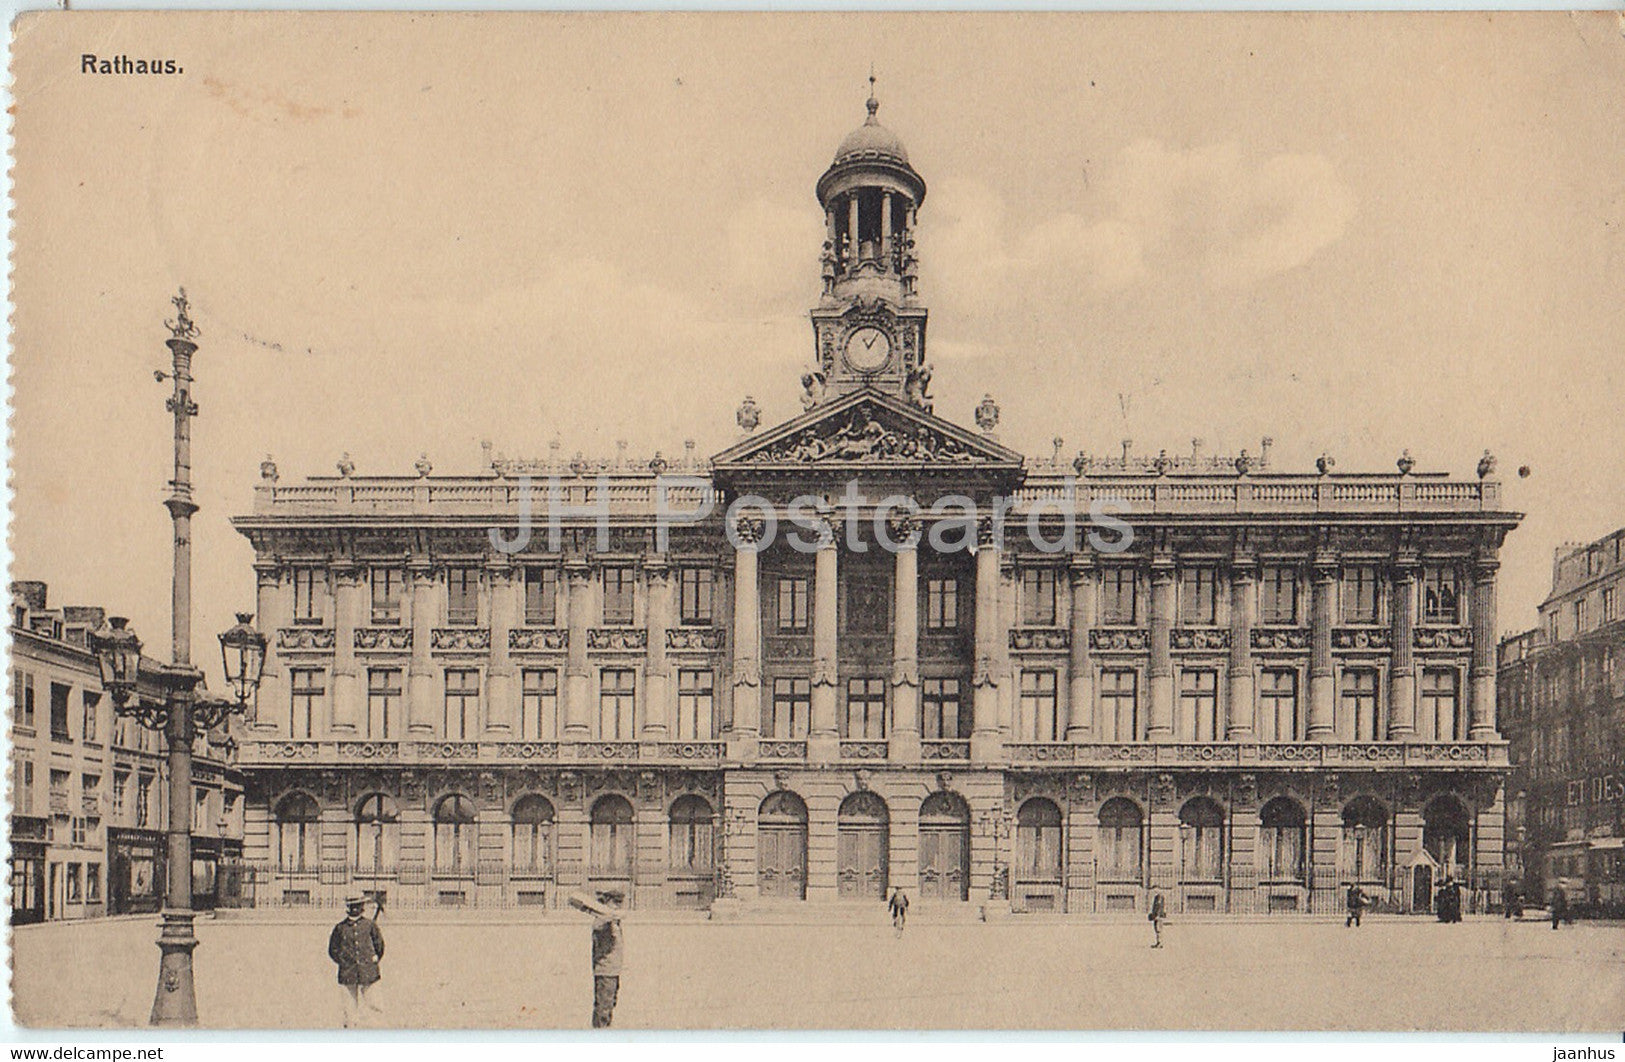 Cambrai - Rathaus - Feldpost - old postcard - 1917 - France - used - JH Postcards